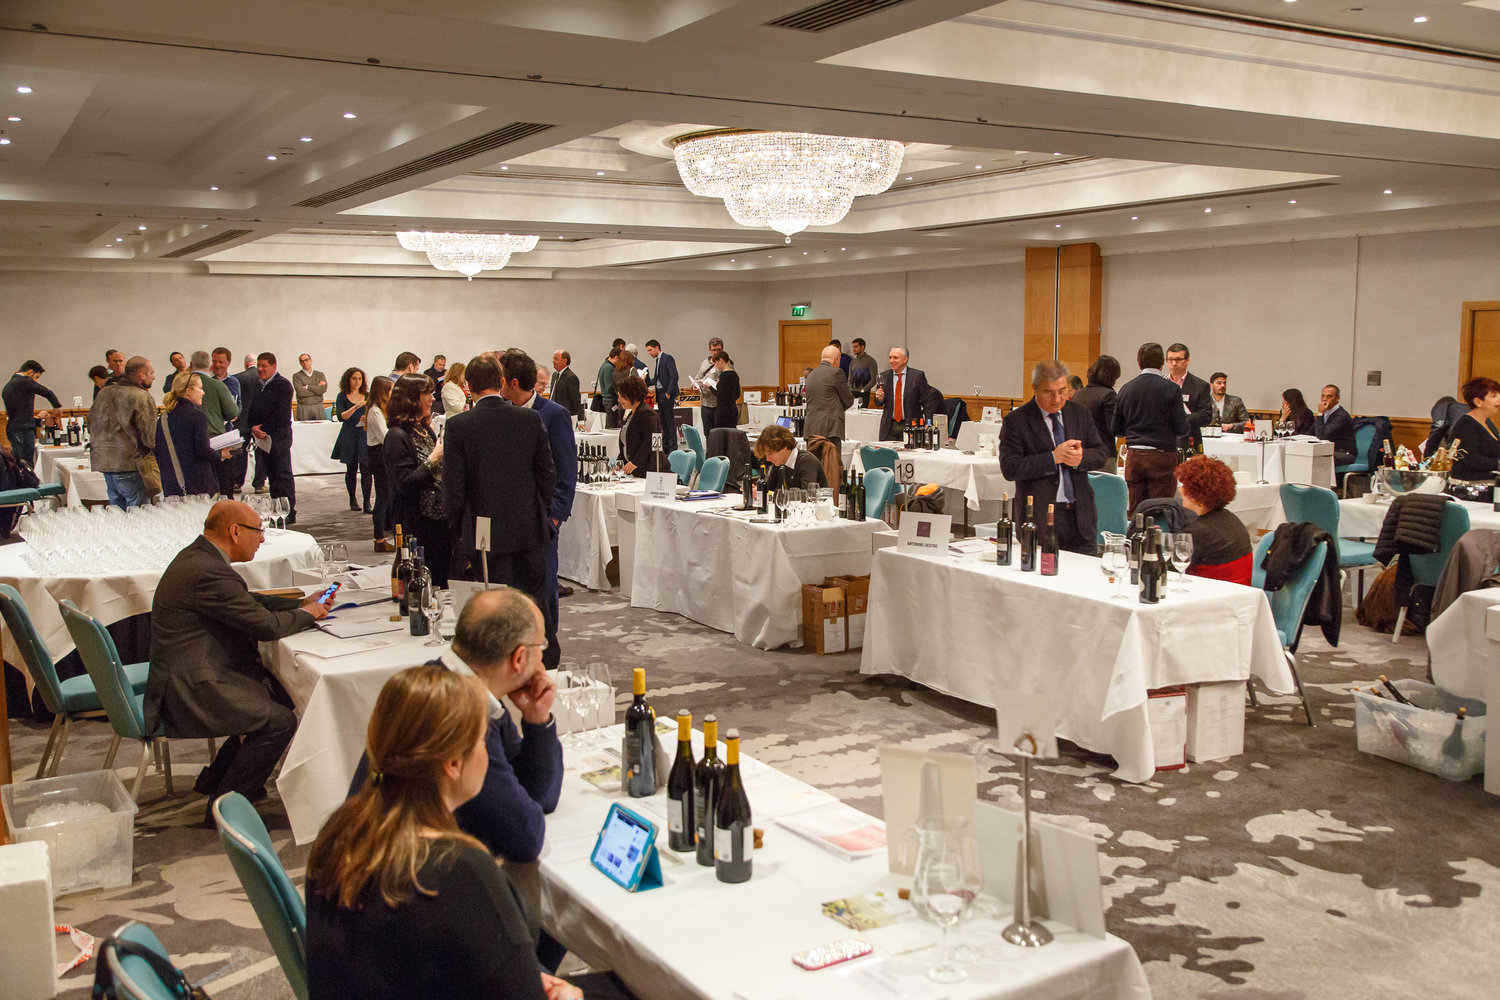 Most of the producers sought representation here and had targeted the fair at Irish wine importers both large and small.